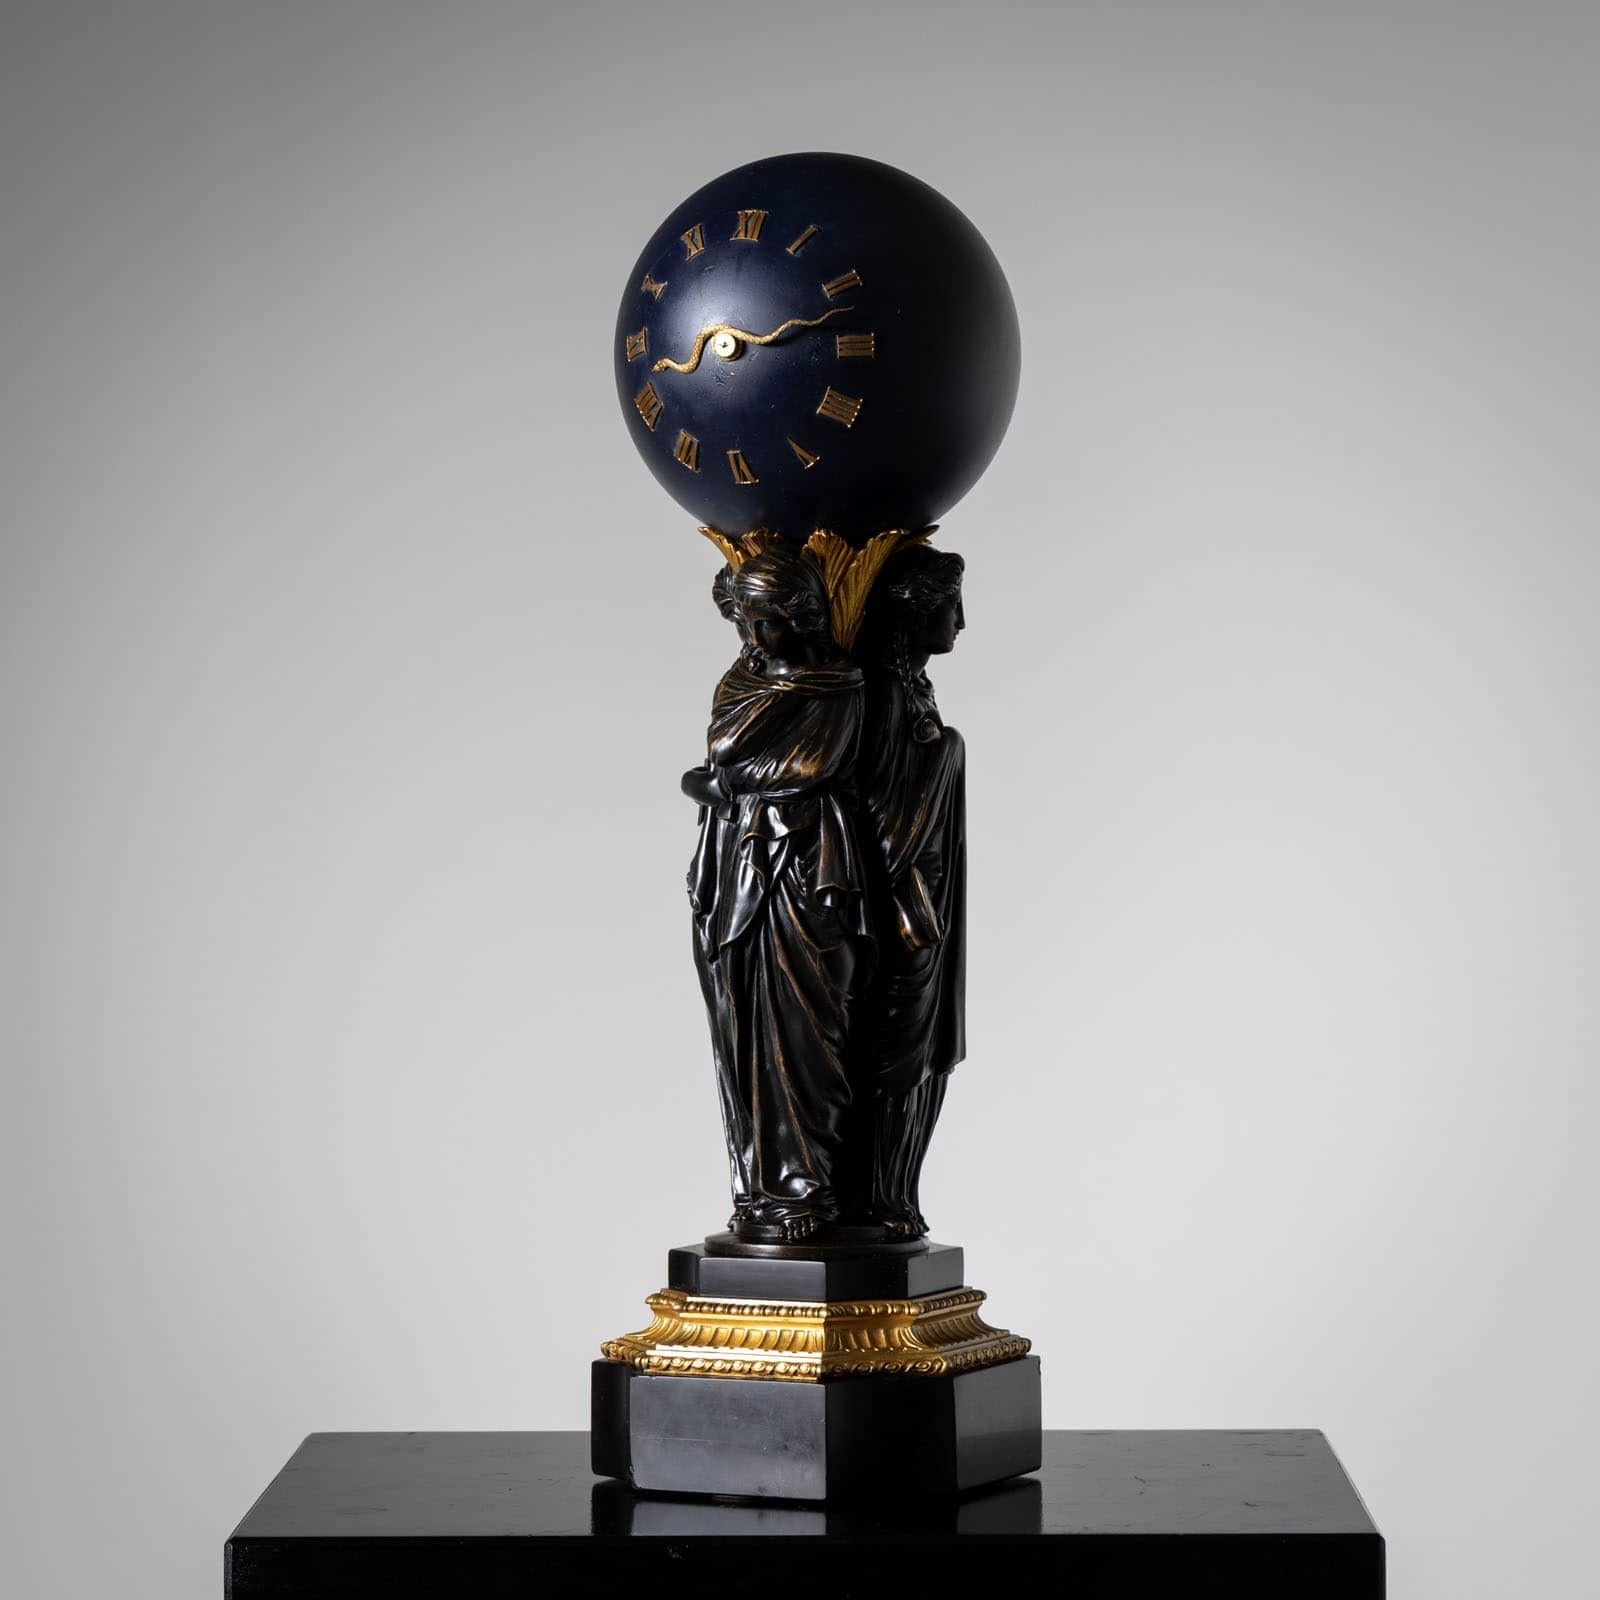 Bronze clock with a dark blue, spherical clock case with Roman hours and snake-shaped hands. The case is supported by three female personifications of the arts of painting, sculpture and architecture. They stand on a curved stone base with a gilded